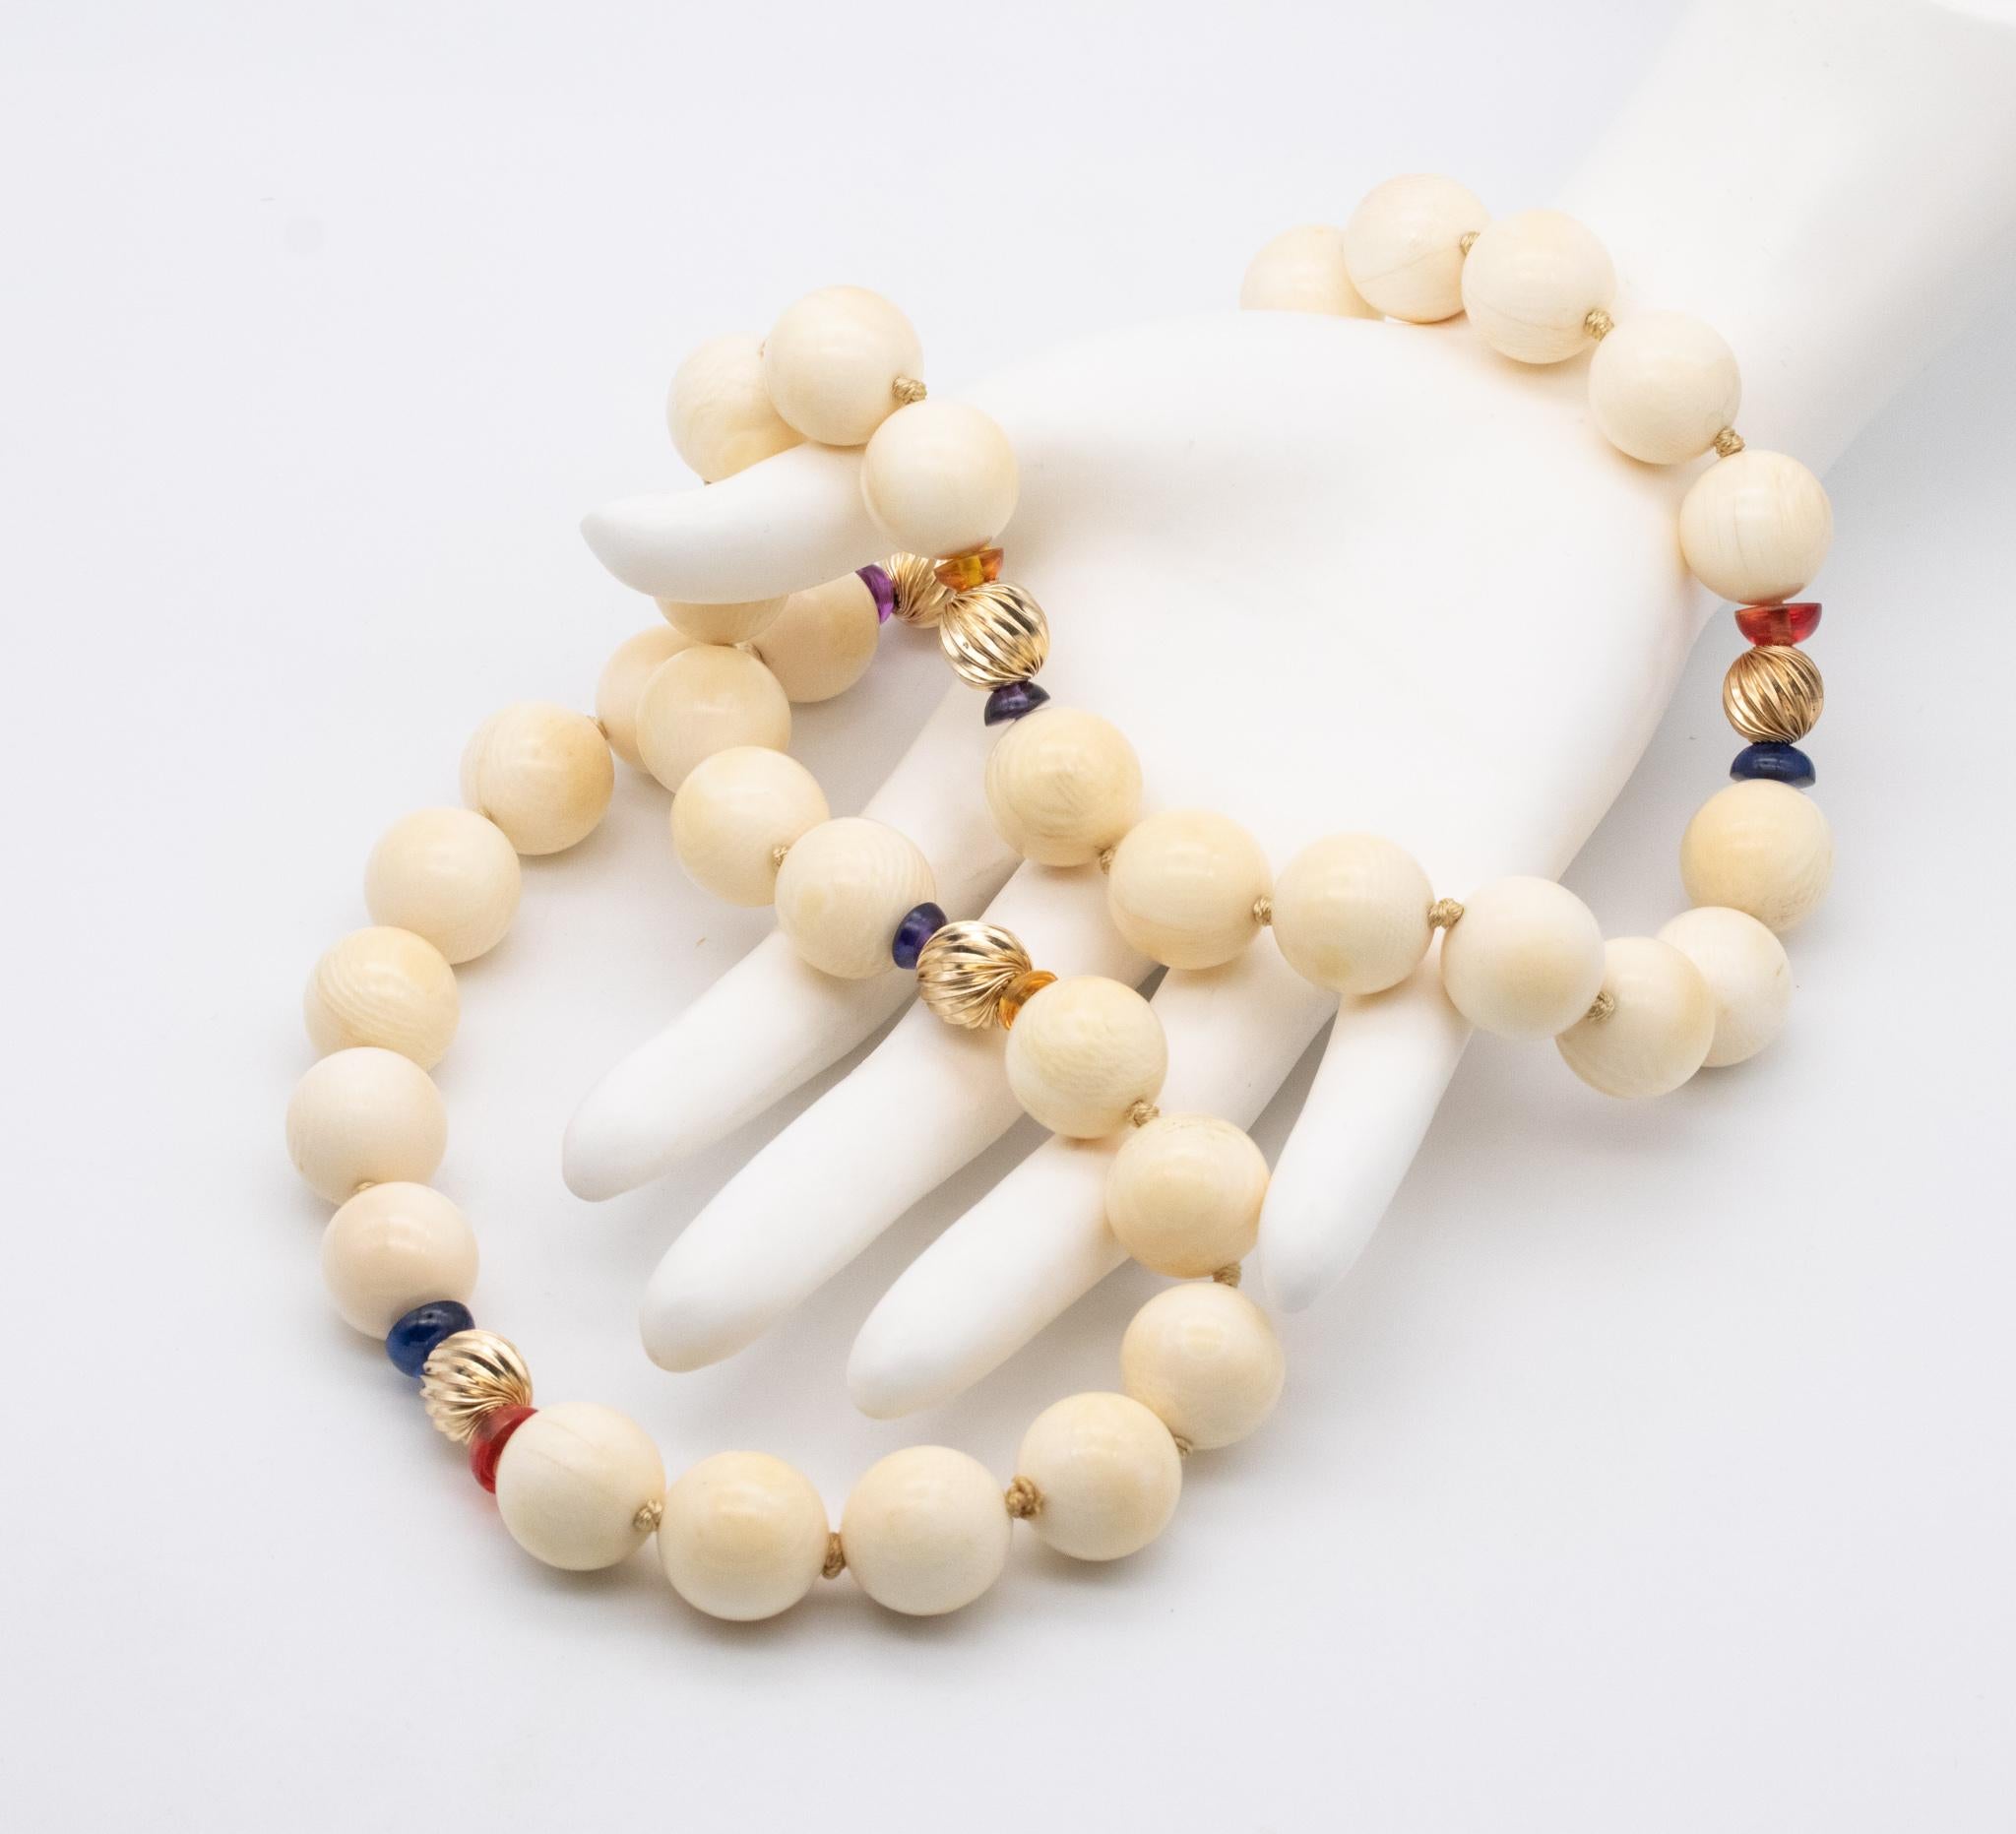 Elegant French Necklace with carved Gemstones

A vintage mid-century piece made in france, back in the 1960's. It is composed by 5 fluted spacers, crafted in 18 karats yellow gold, 10 half spheres carved from natural tourmaline of different colors